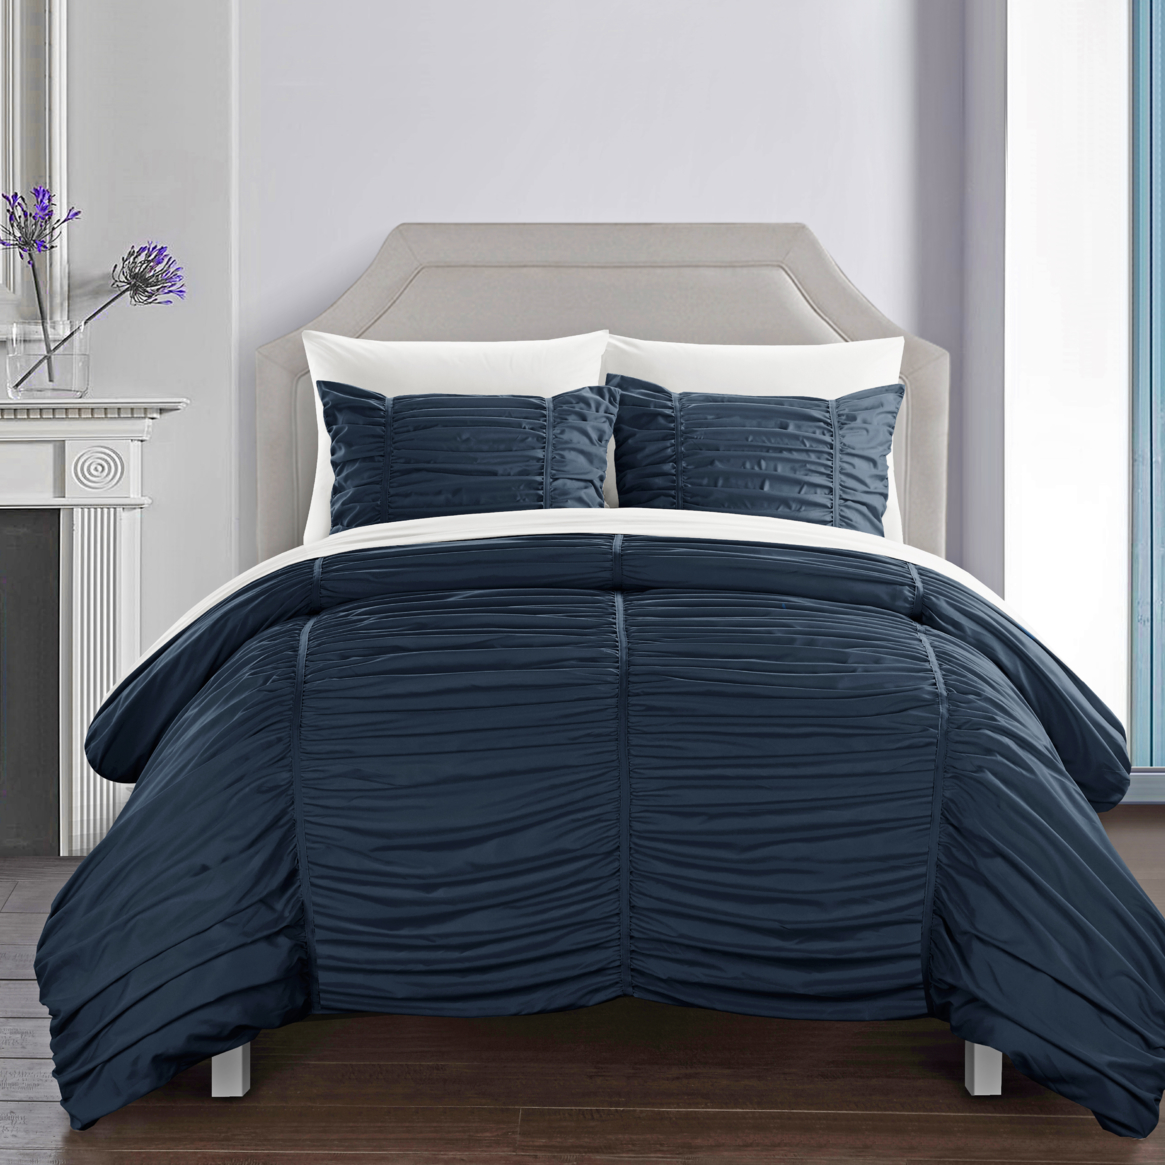 Kleia 7 Or 5 Piece Comforter Set Contemporary Striped Ruched Ruffled Design Bed In A Bag - Navy, Queen